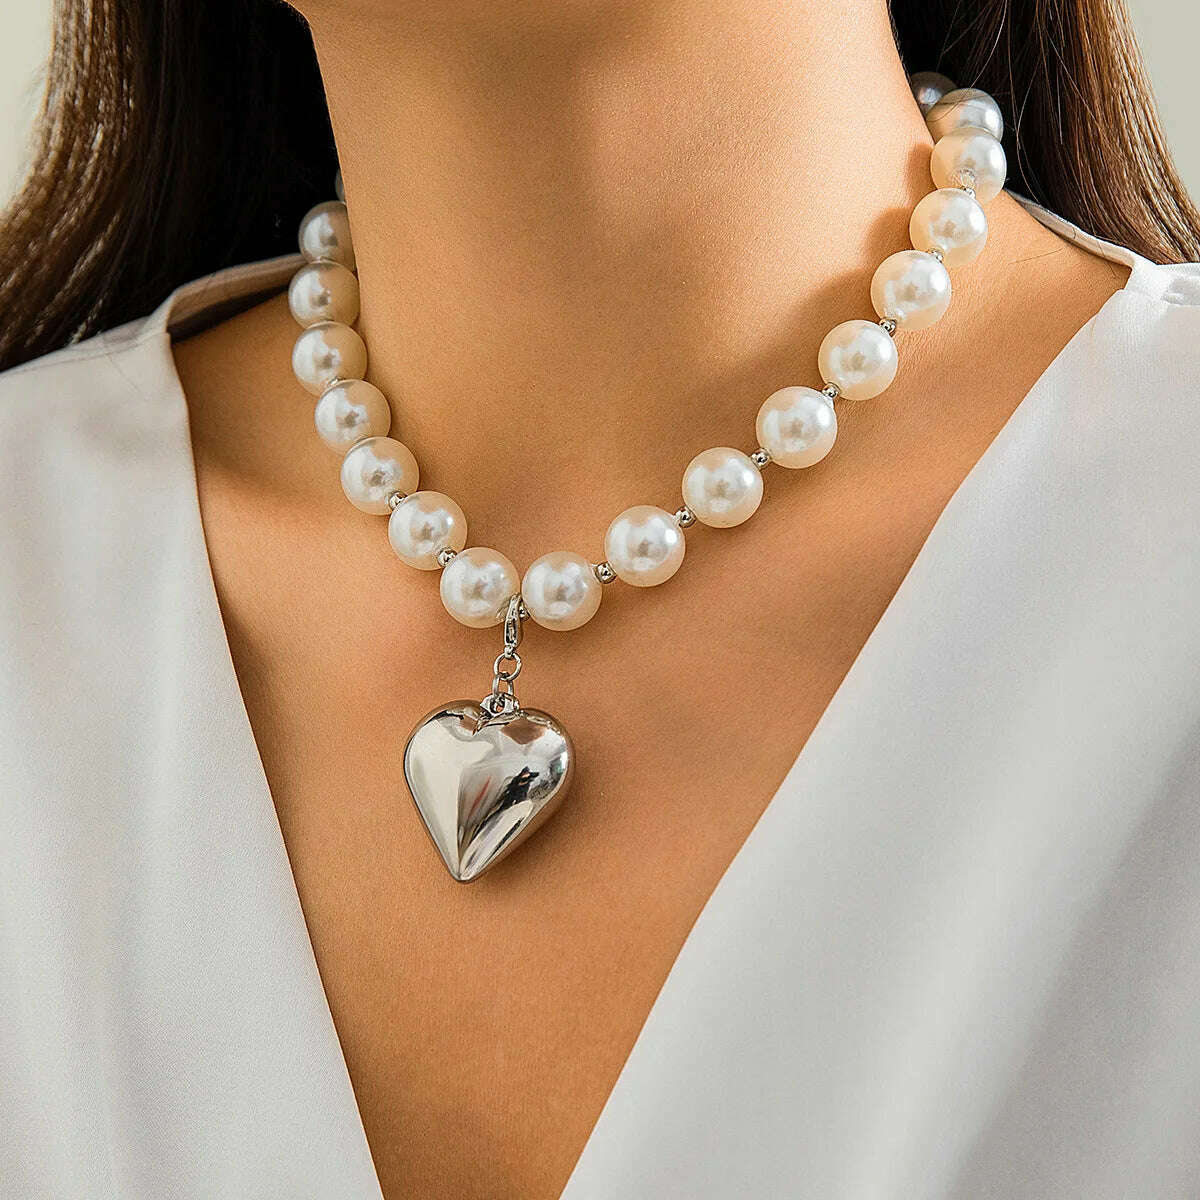 KIMLUD, DIEZI Exaggerated CCB Heart Pendant Necklace Women Party Vintage Punk Fashion Pearl Beads Choker Statement Collar Neck Jewelry, silver 6215, KIMLUD Womens Clothes